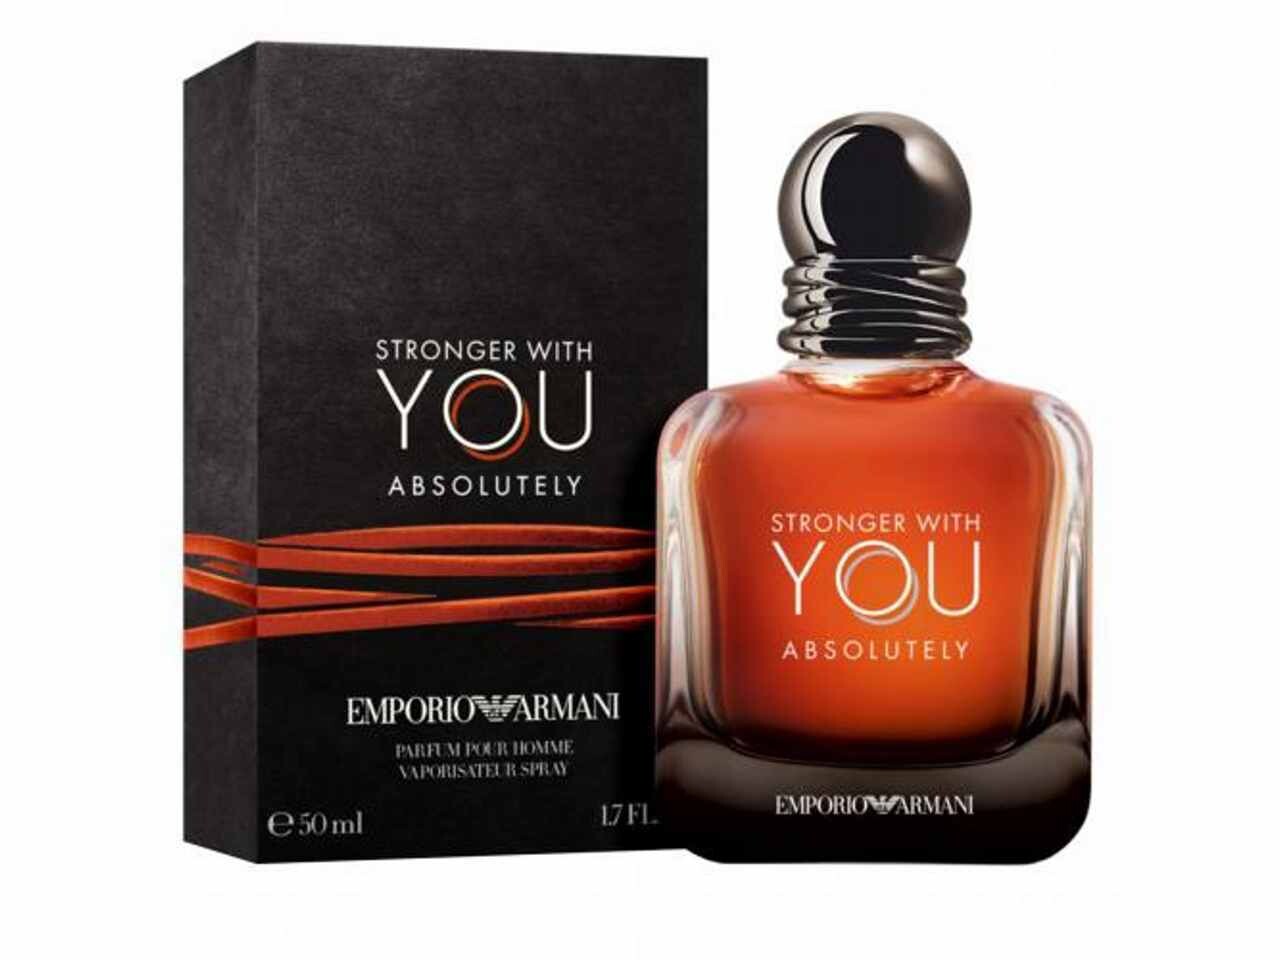 Stronger With You Absolutely edp 50ml